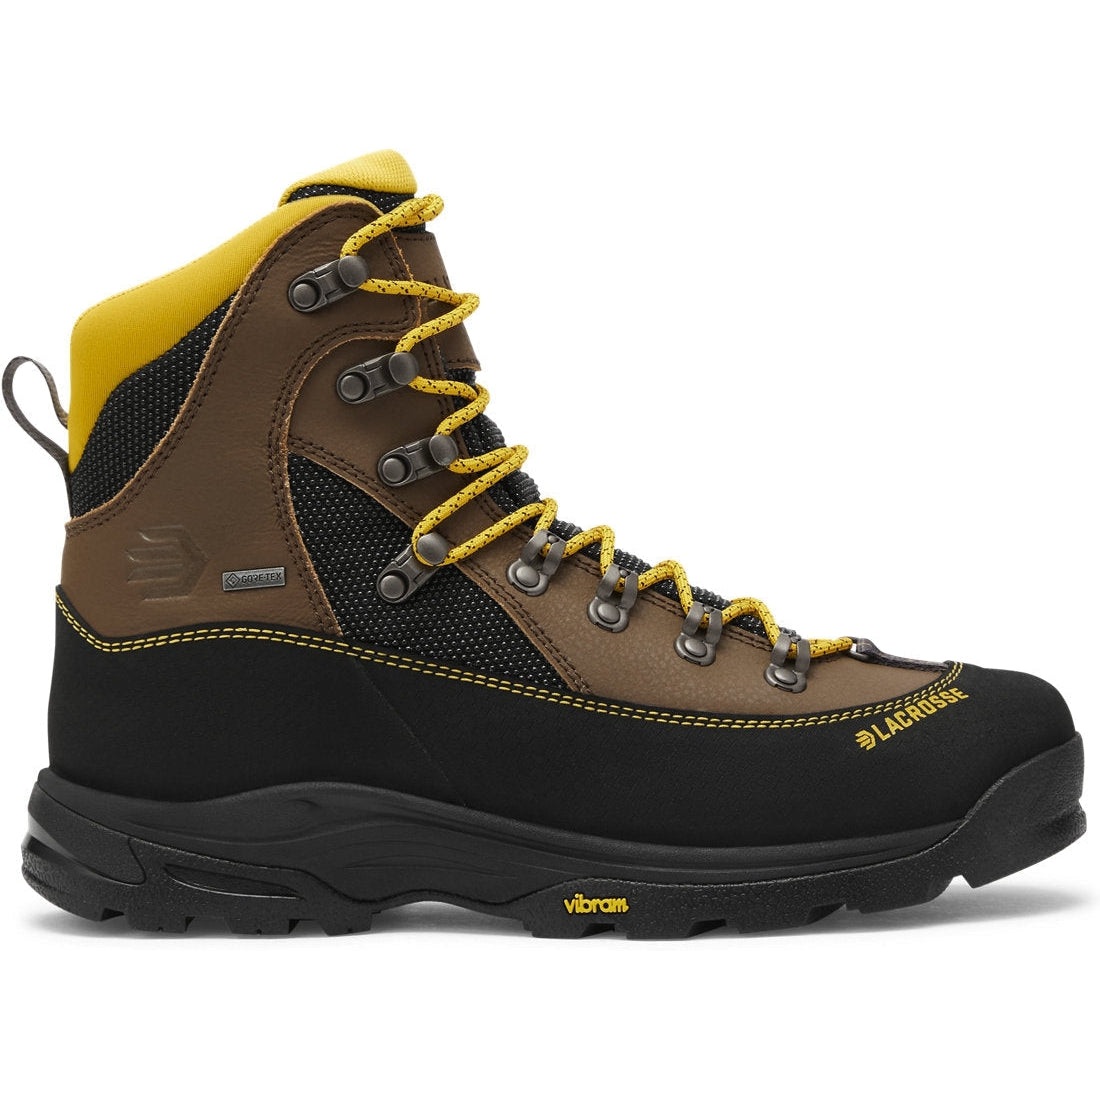 Lacrosse Men's Ursa Ms 7" WP Lace Up Work Boot -Brown- 533611 7 / Medium / Brown/Gold - Overlook Boots